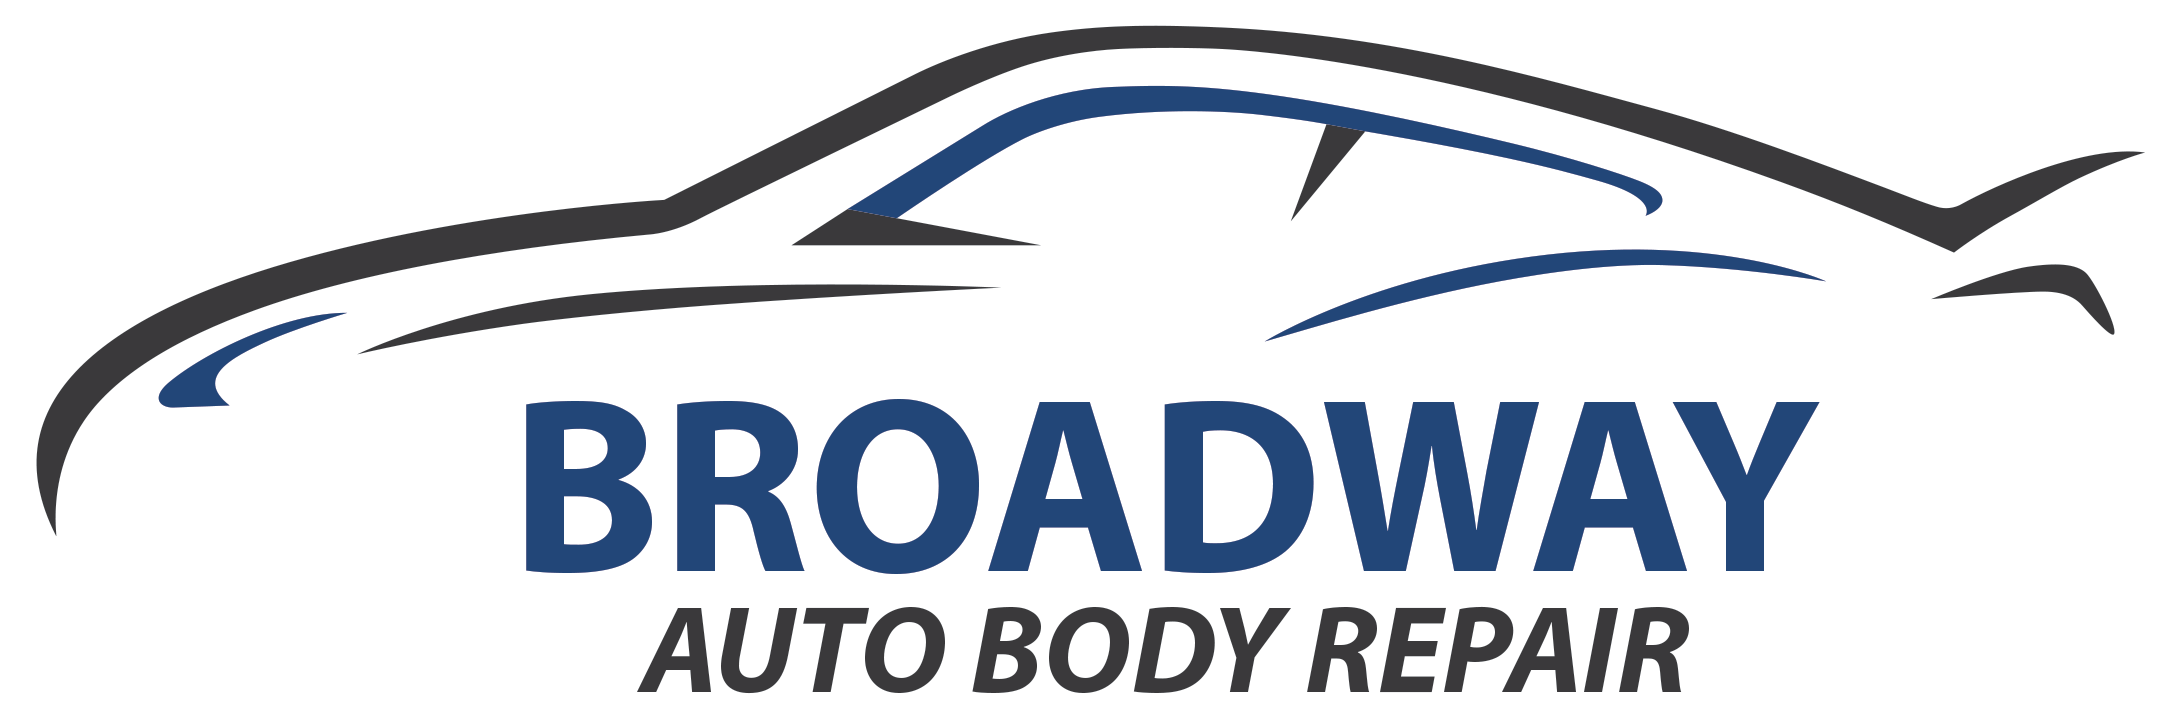 Broadway Auto Body Repairs /broadway refinishing and paint services